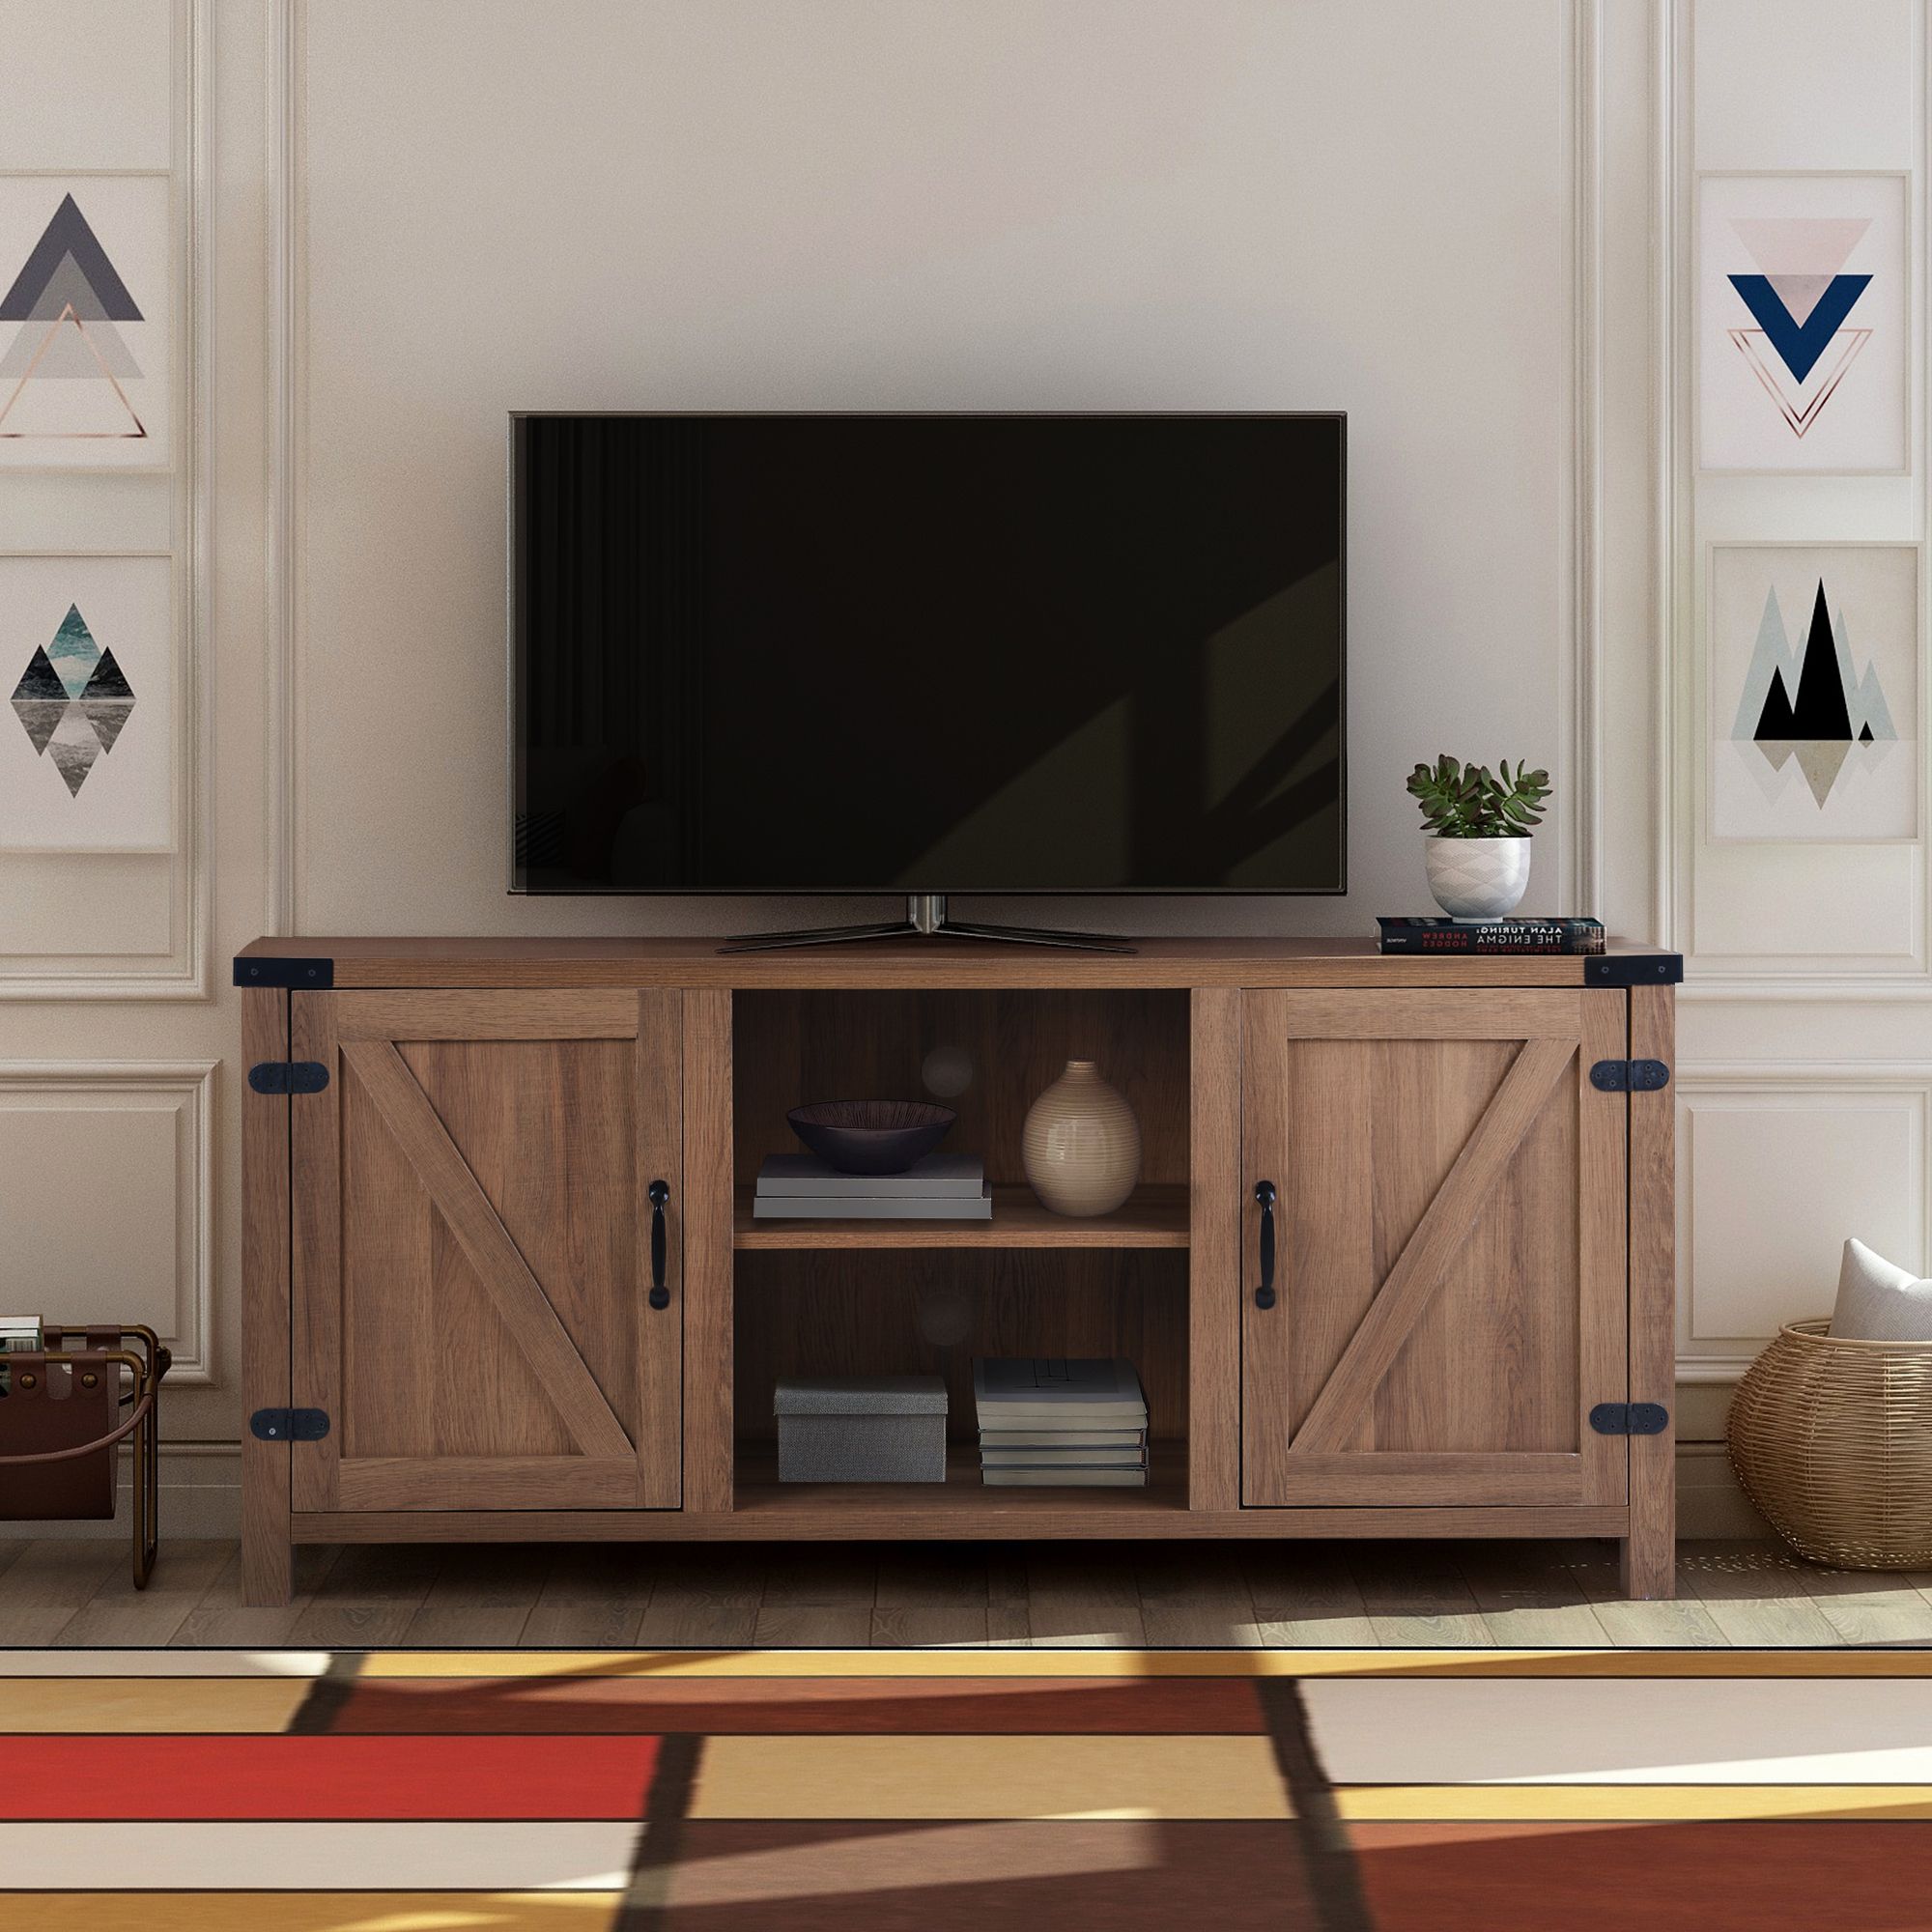 Labarbera Tv Stands For Tvs Up To 58" For Well Known Clearance! Modern Tv Stand Cabinet, Farmhouse Tv Stand For (View 1 of 20)